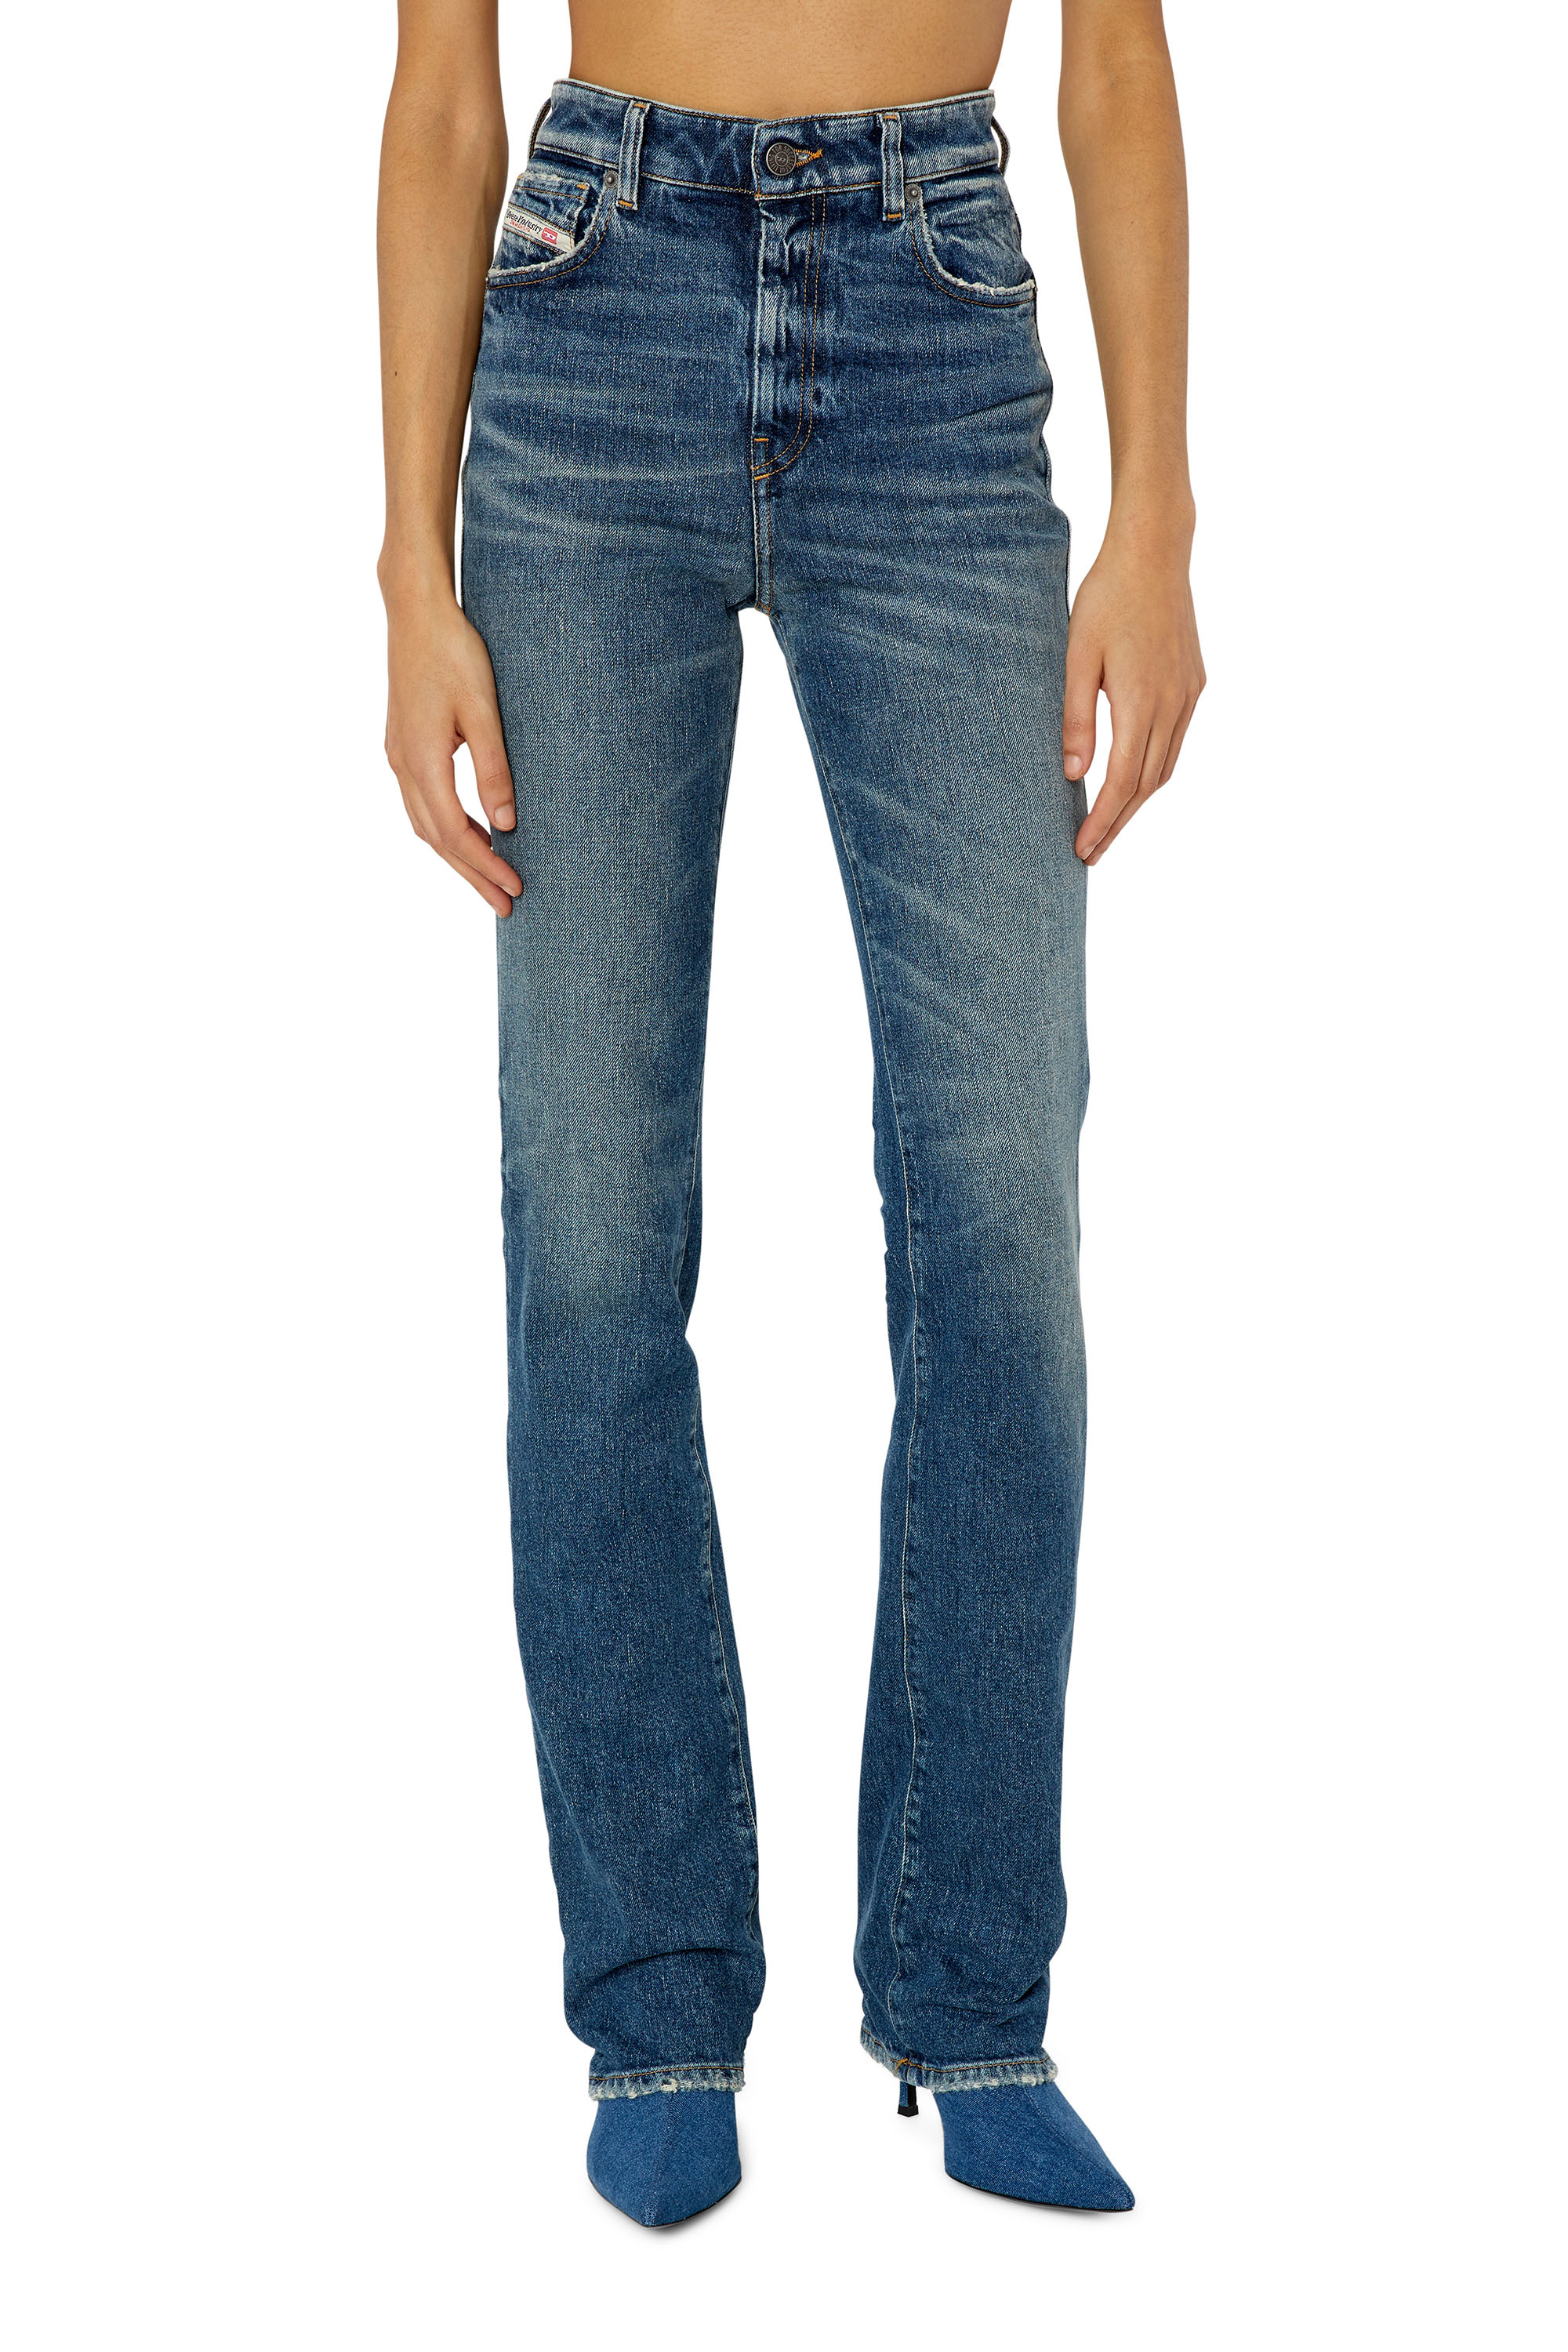 Women's New Arrival Jeans: Skinny, Bootcut, Straight and Bootcut 